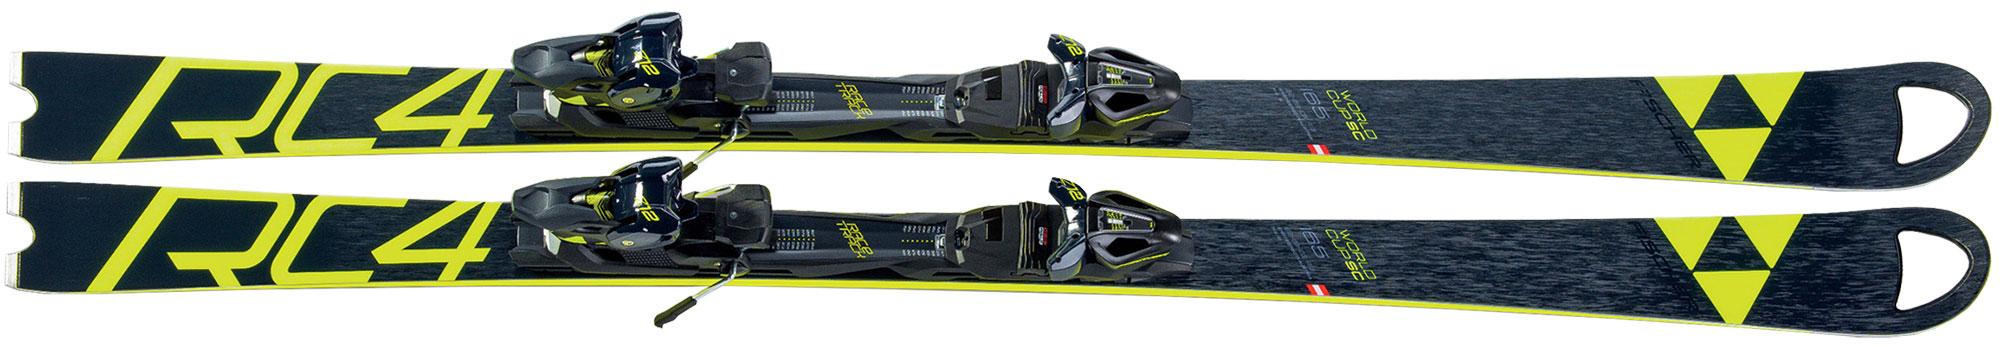 Sci fischer' RC4 Worldcup SC Yellow Base RT